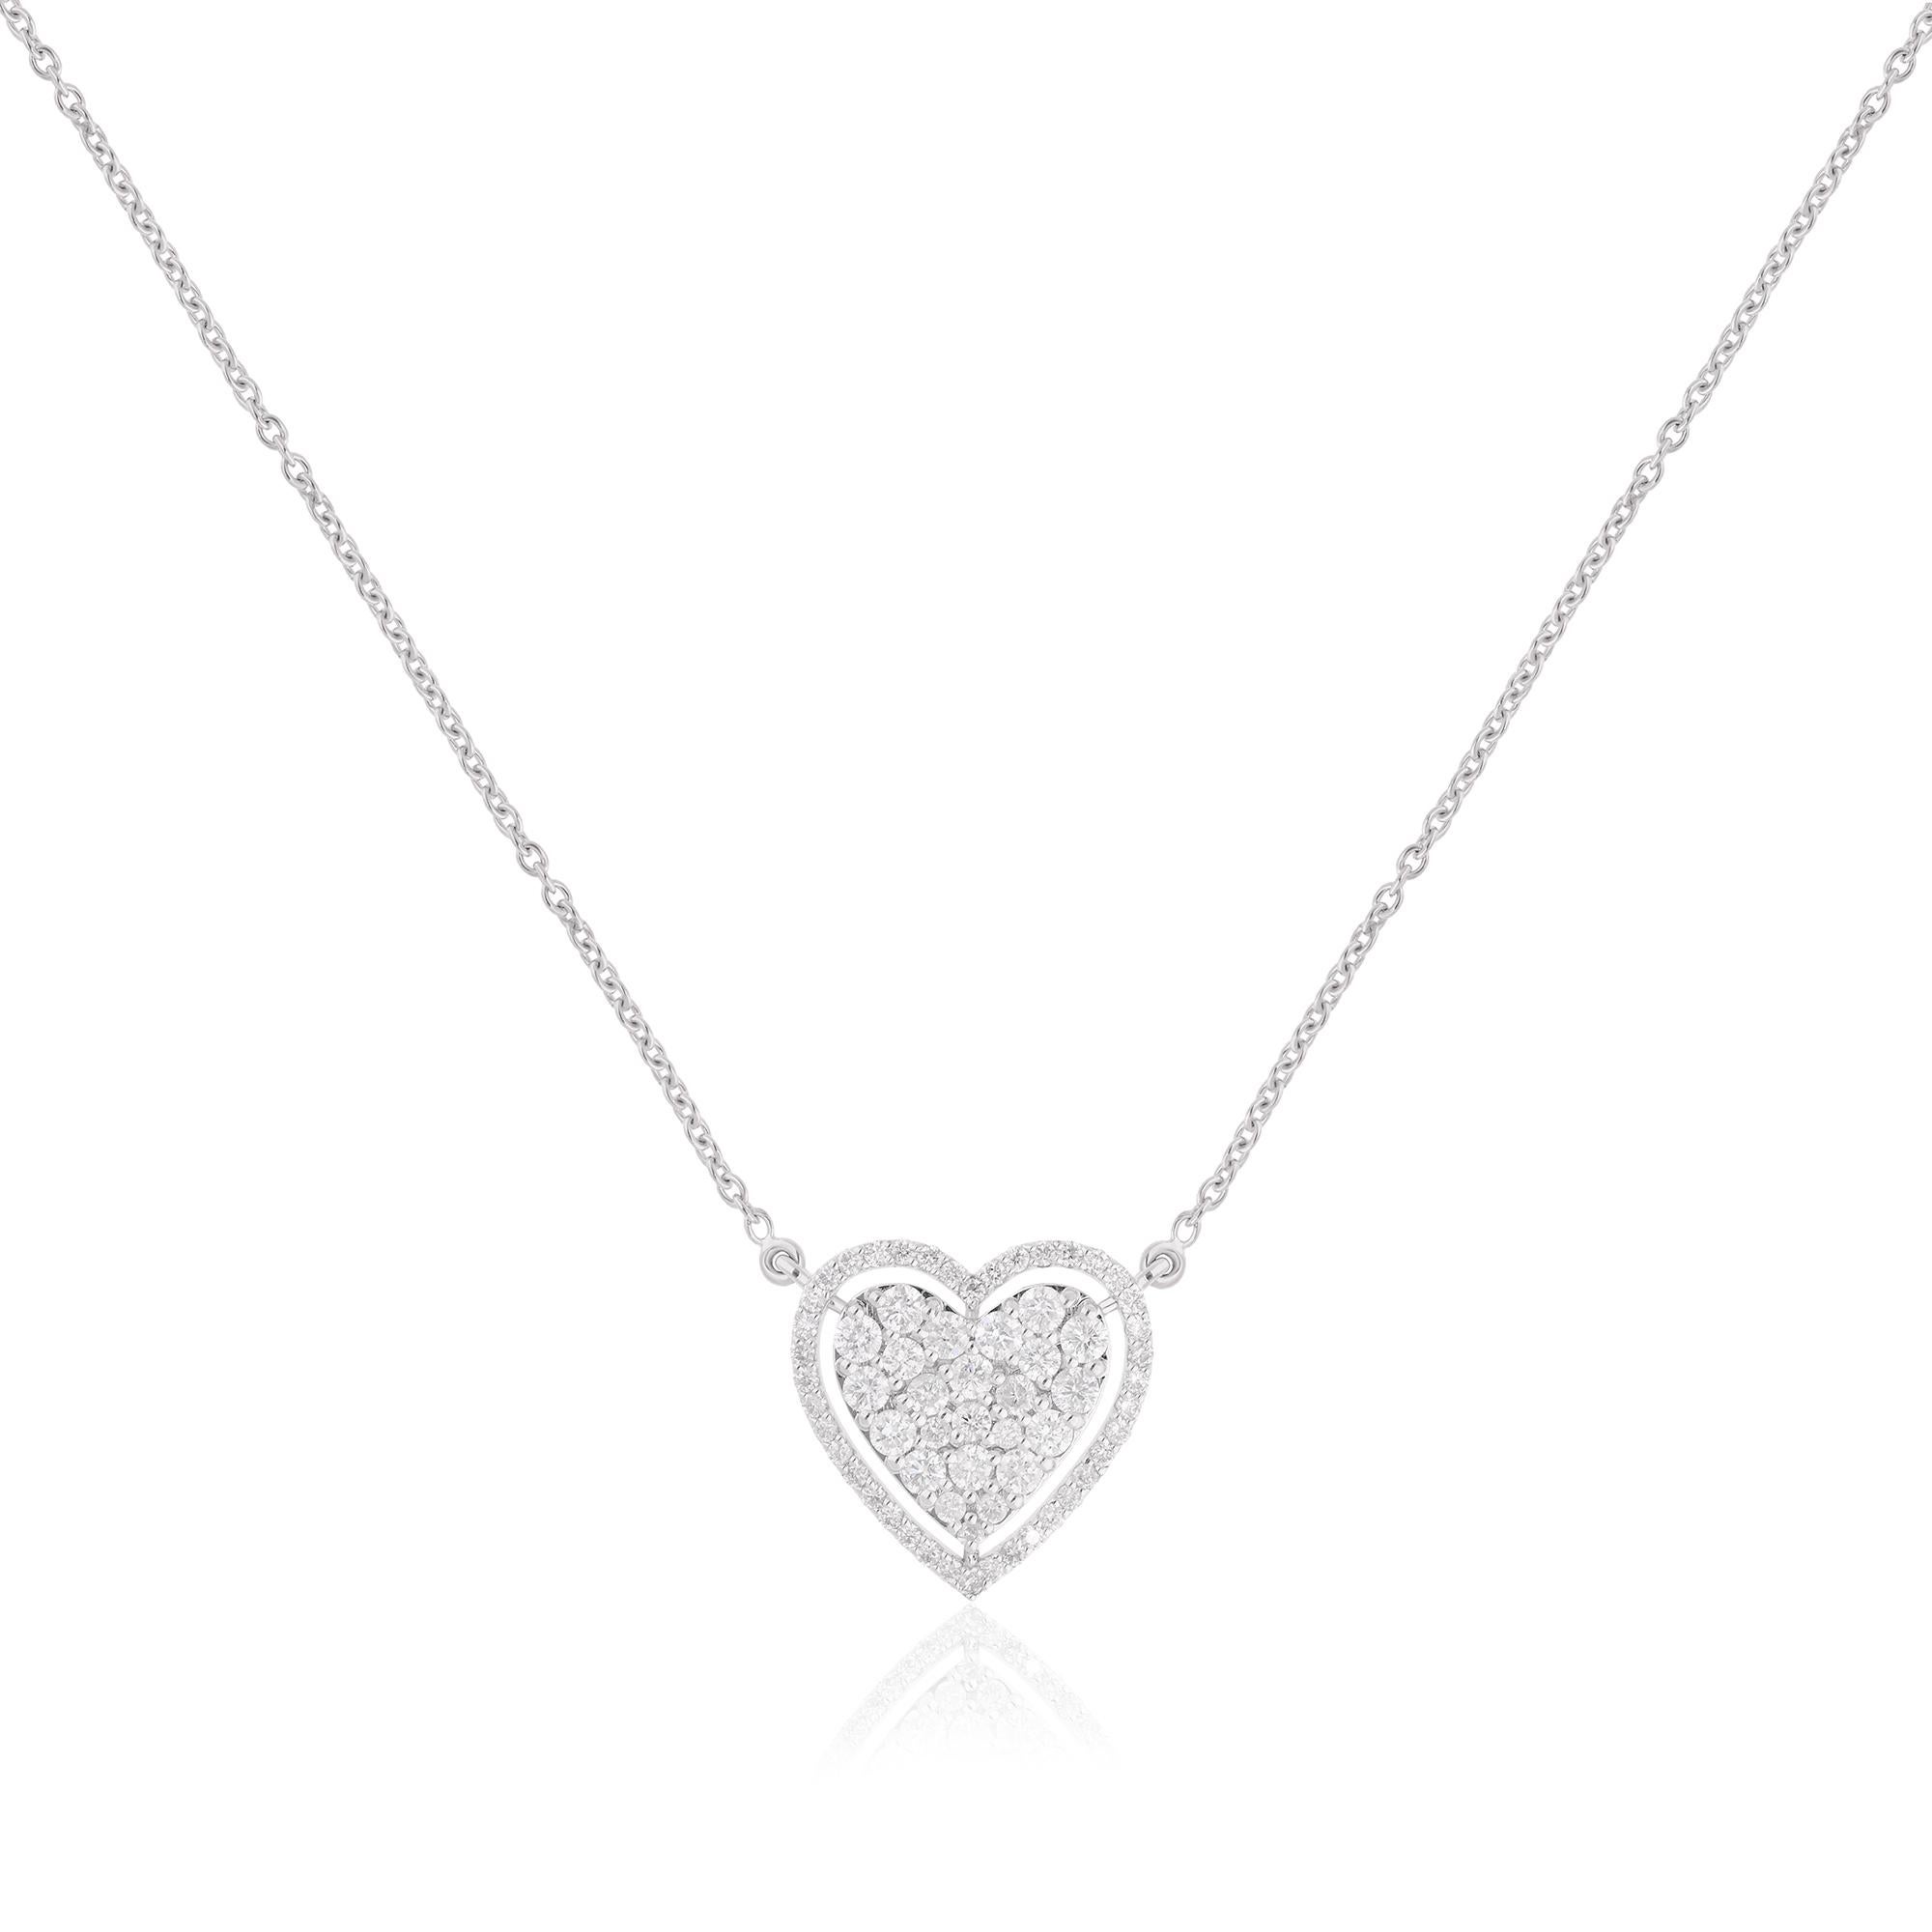 Dive into the realm of romance and elegance with this captivating Natural 1.31 Carat Diamond Pave Heart Charm Necklace, meticulously crafted in luminous 18 Karat White Gold. This exquisite piece of fine jewelry is a radiant symbol of love and